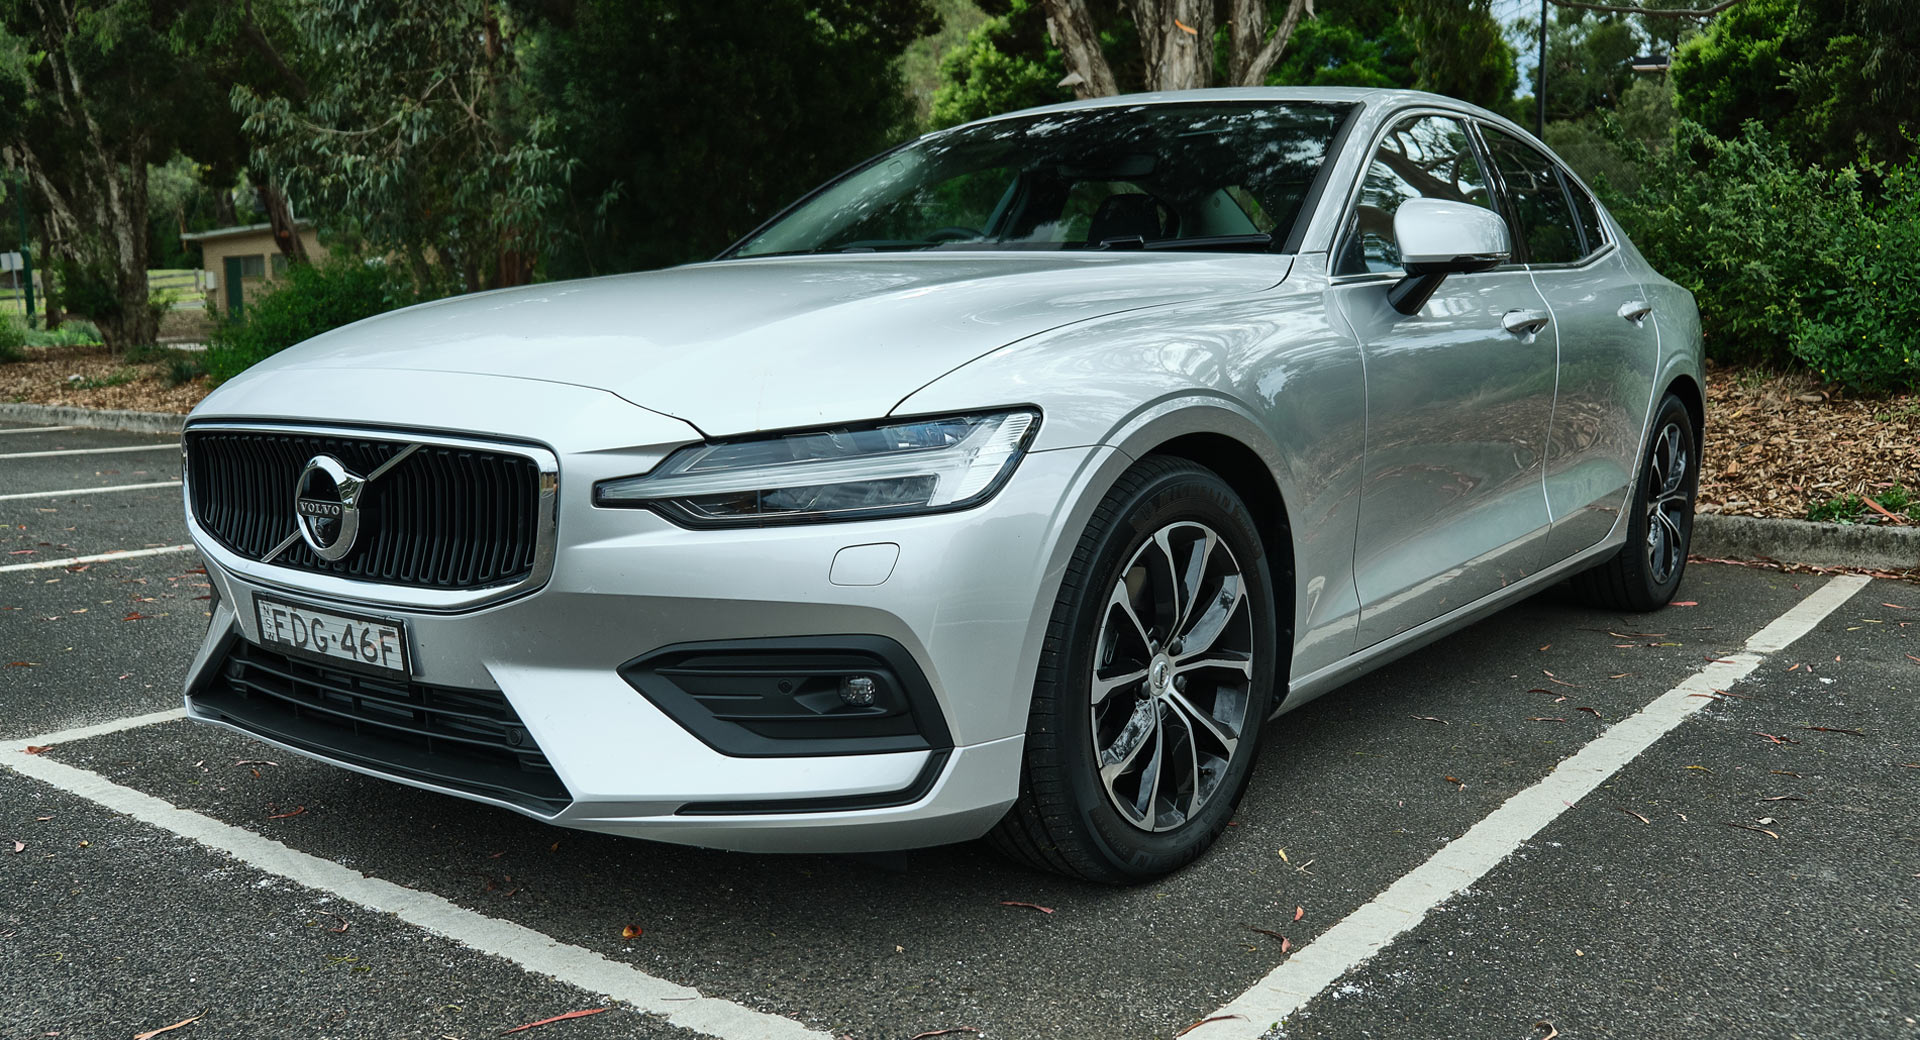 verden emulsion segment Review: 2020 Volvo S60 T5 Momentum Seeks Its Place In The Compact Luxury  Sedan Class | Carscoops